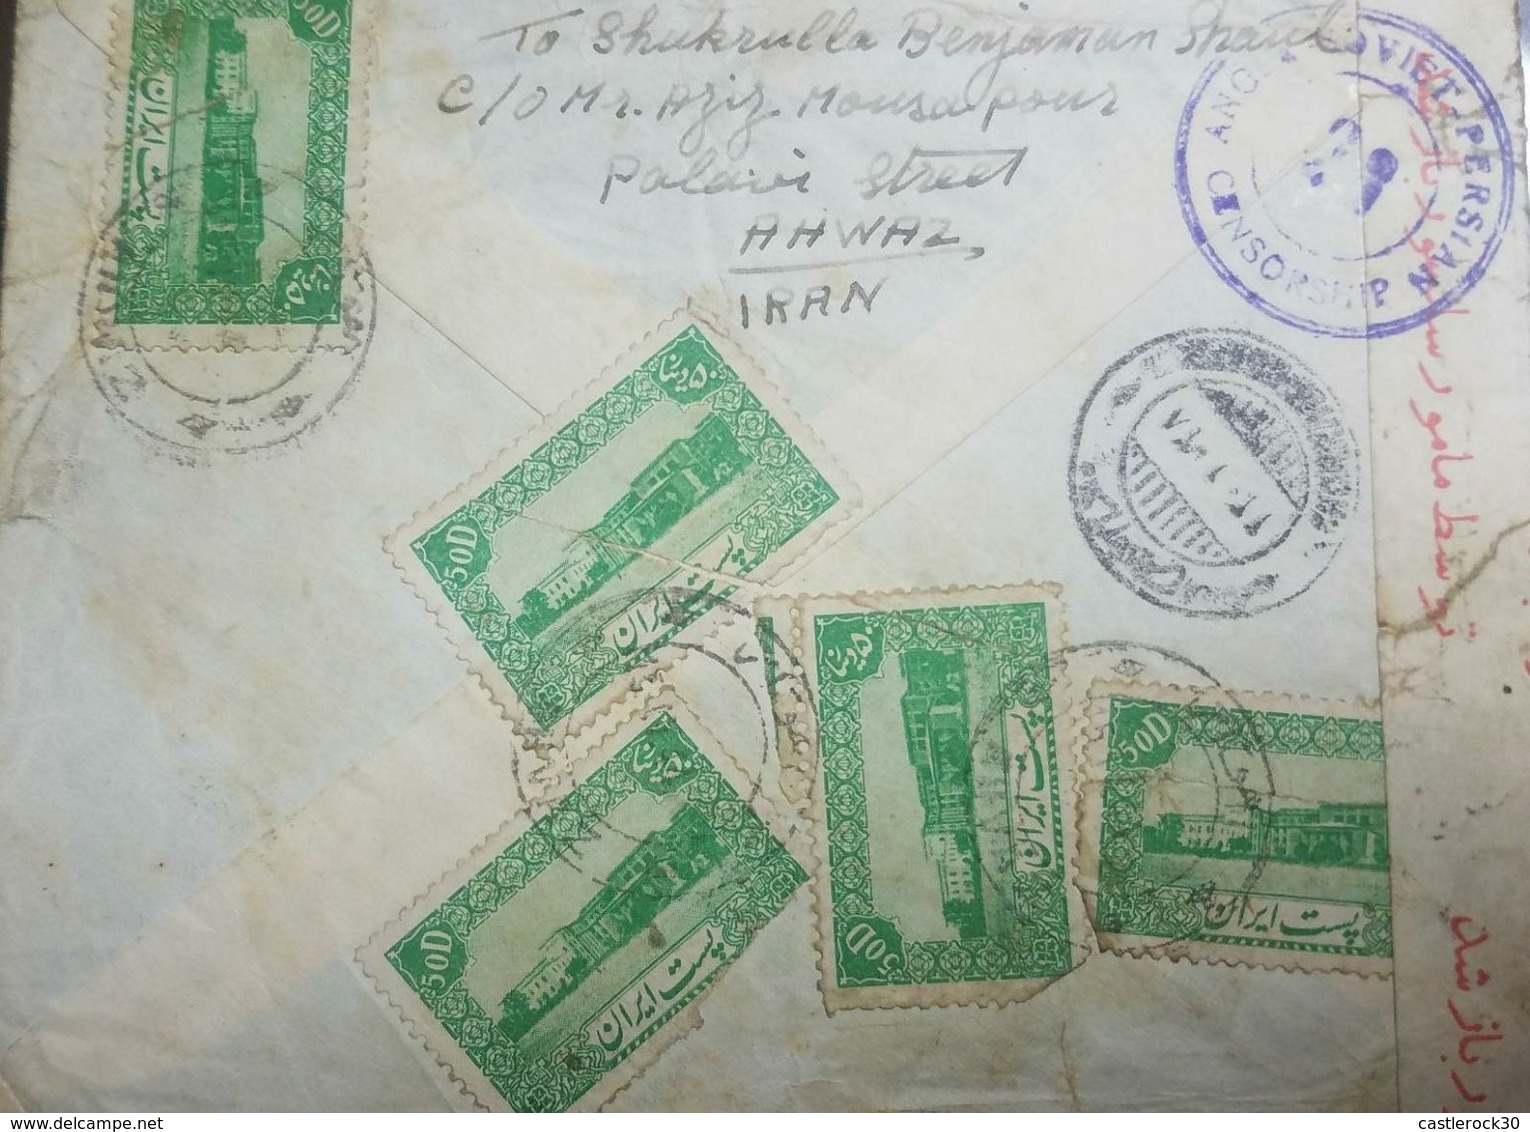 L) 1940 PERSIA, MINISTRY OF JUSTICE, SCOTT A65, 50D, GREEN, ARCHITECTURE, CIRCULATED COVER FROM PERSIA TO USA - Iran